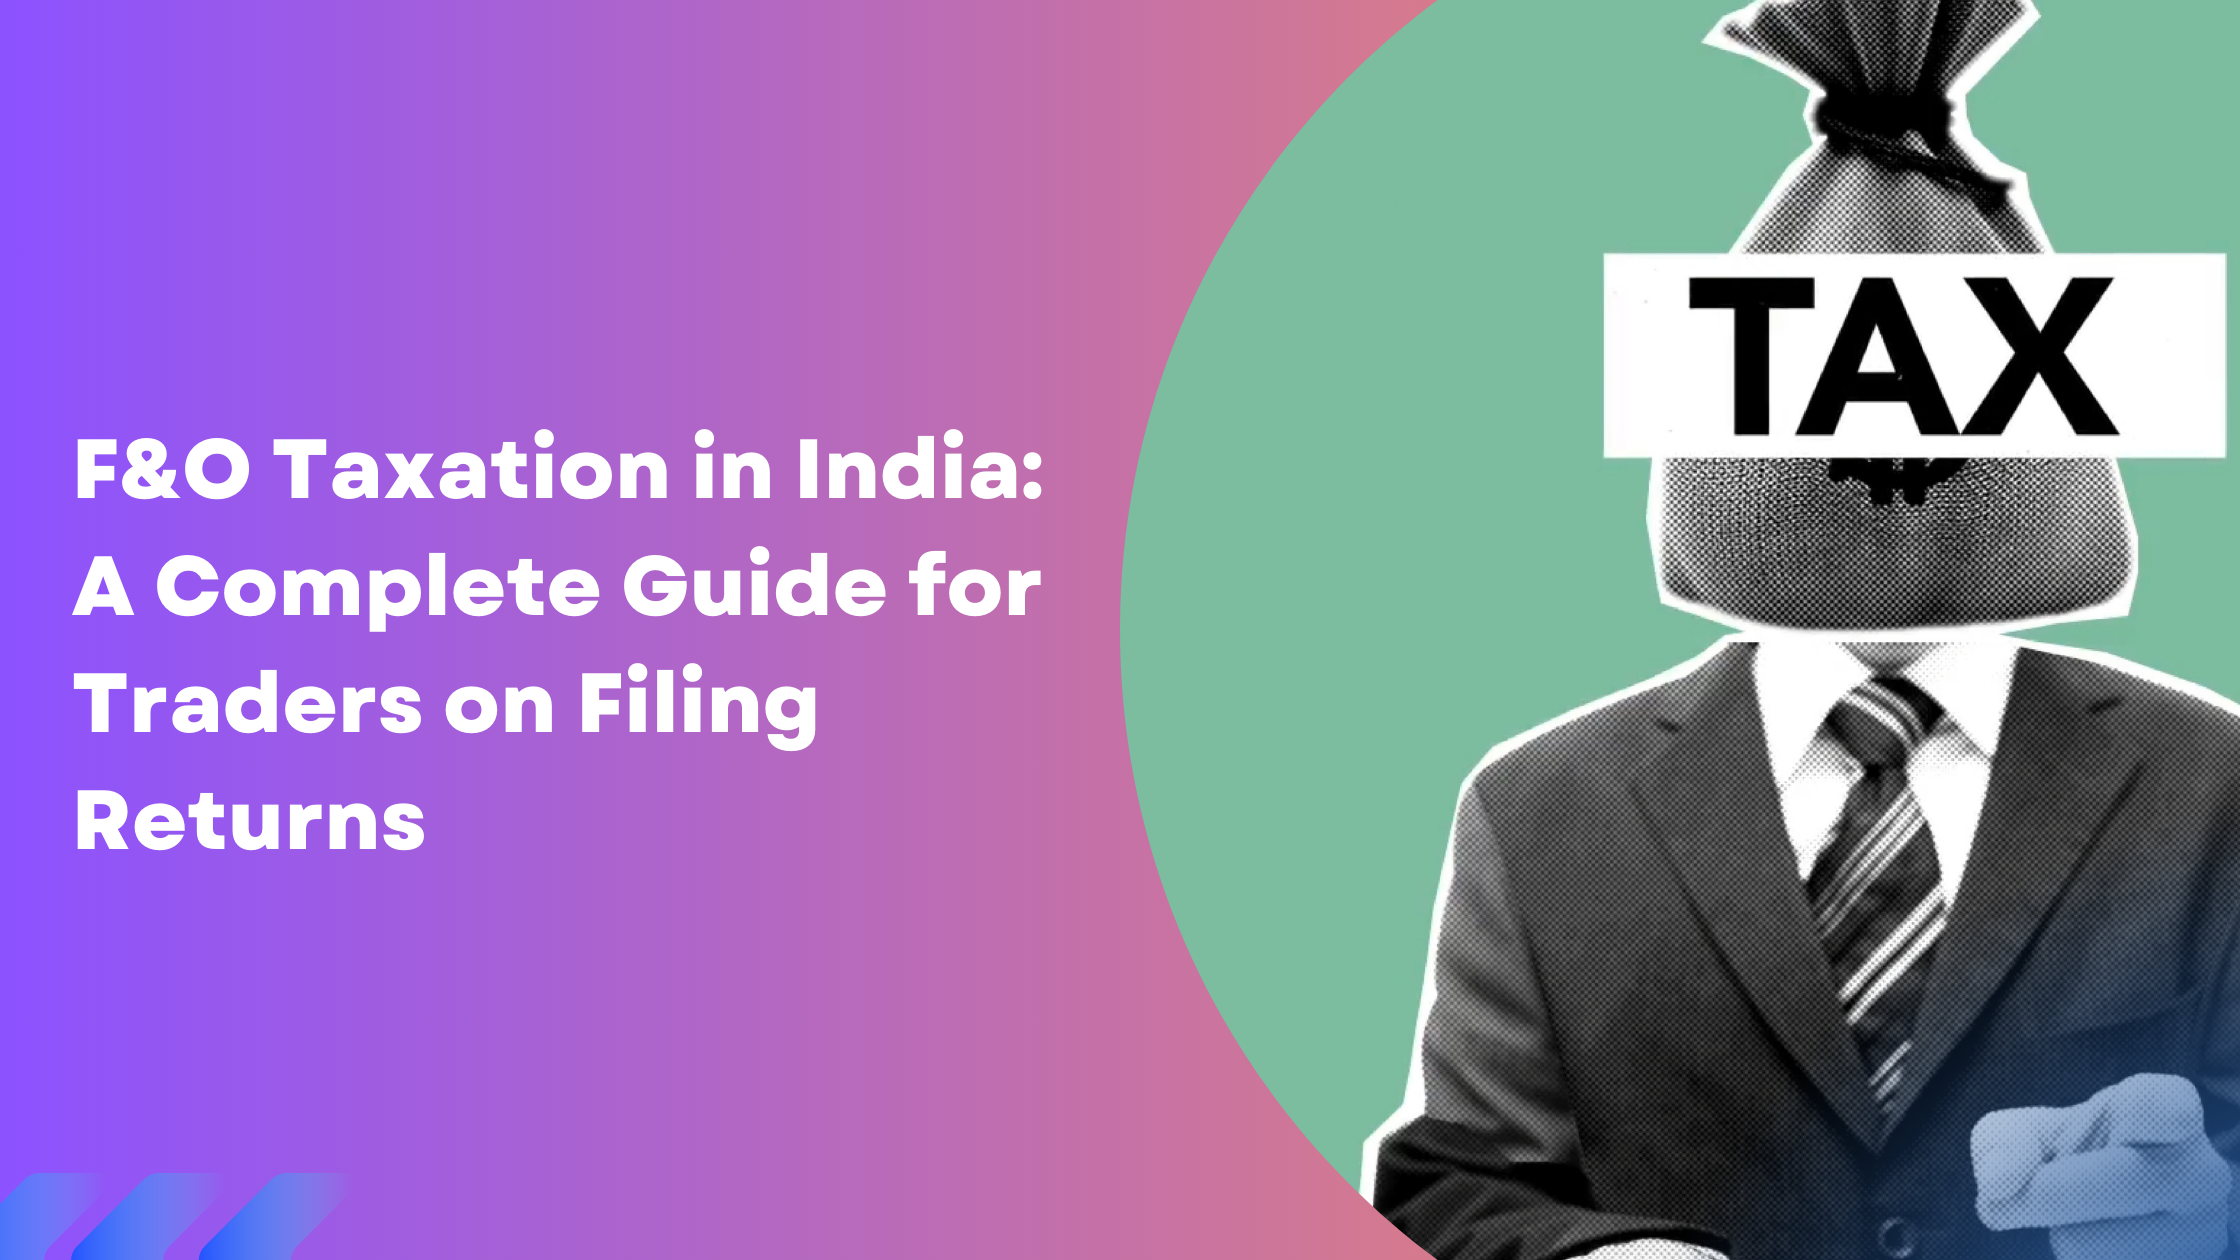 F&O Taxation in India: A Complete Guide for Traders on Filing Returns